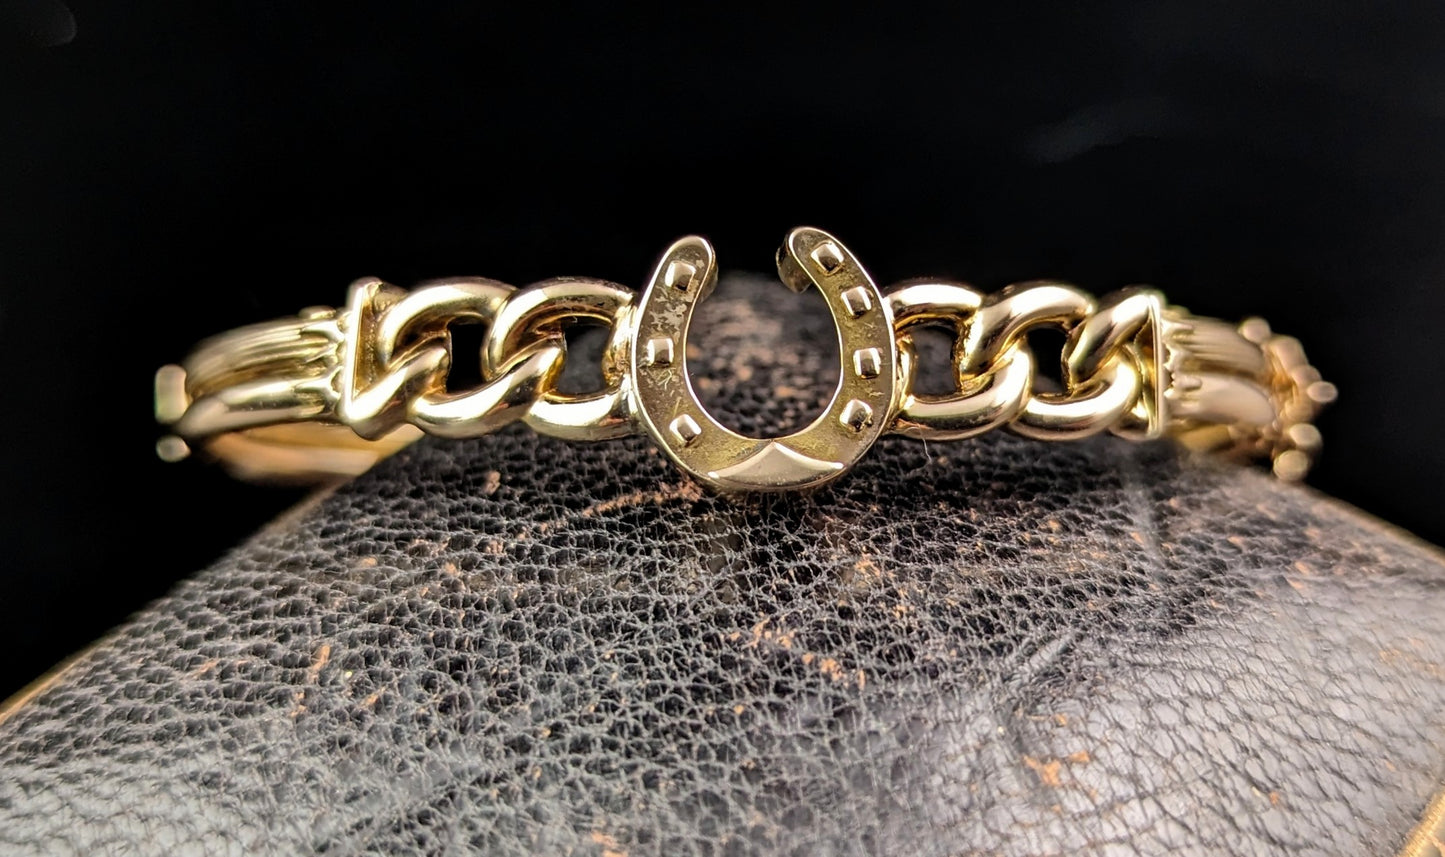 Antique Victorian 9ct gold lucky horseshoe bangle